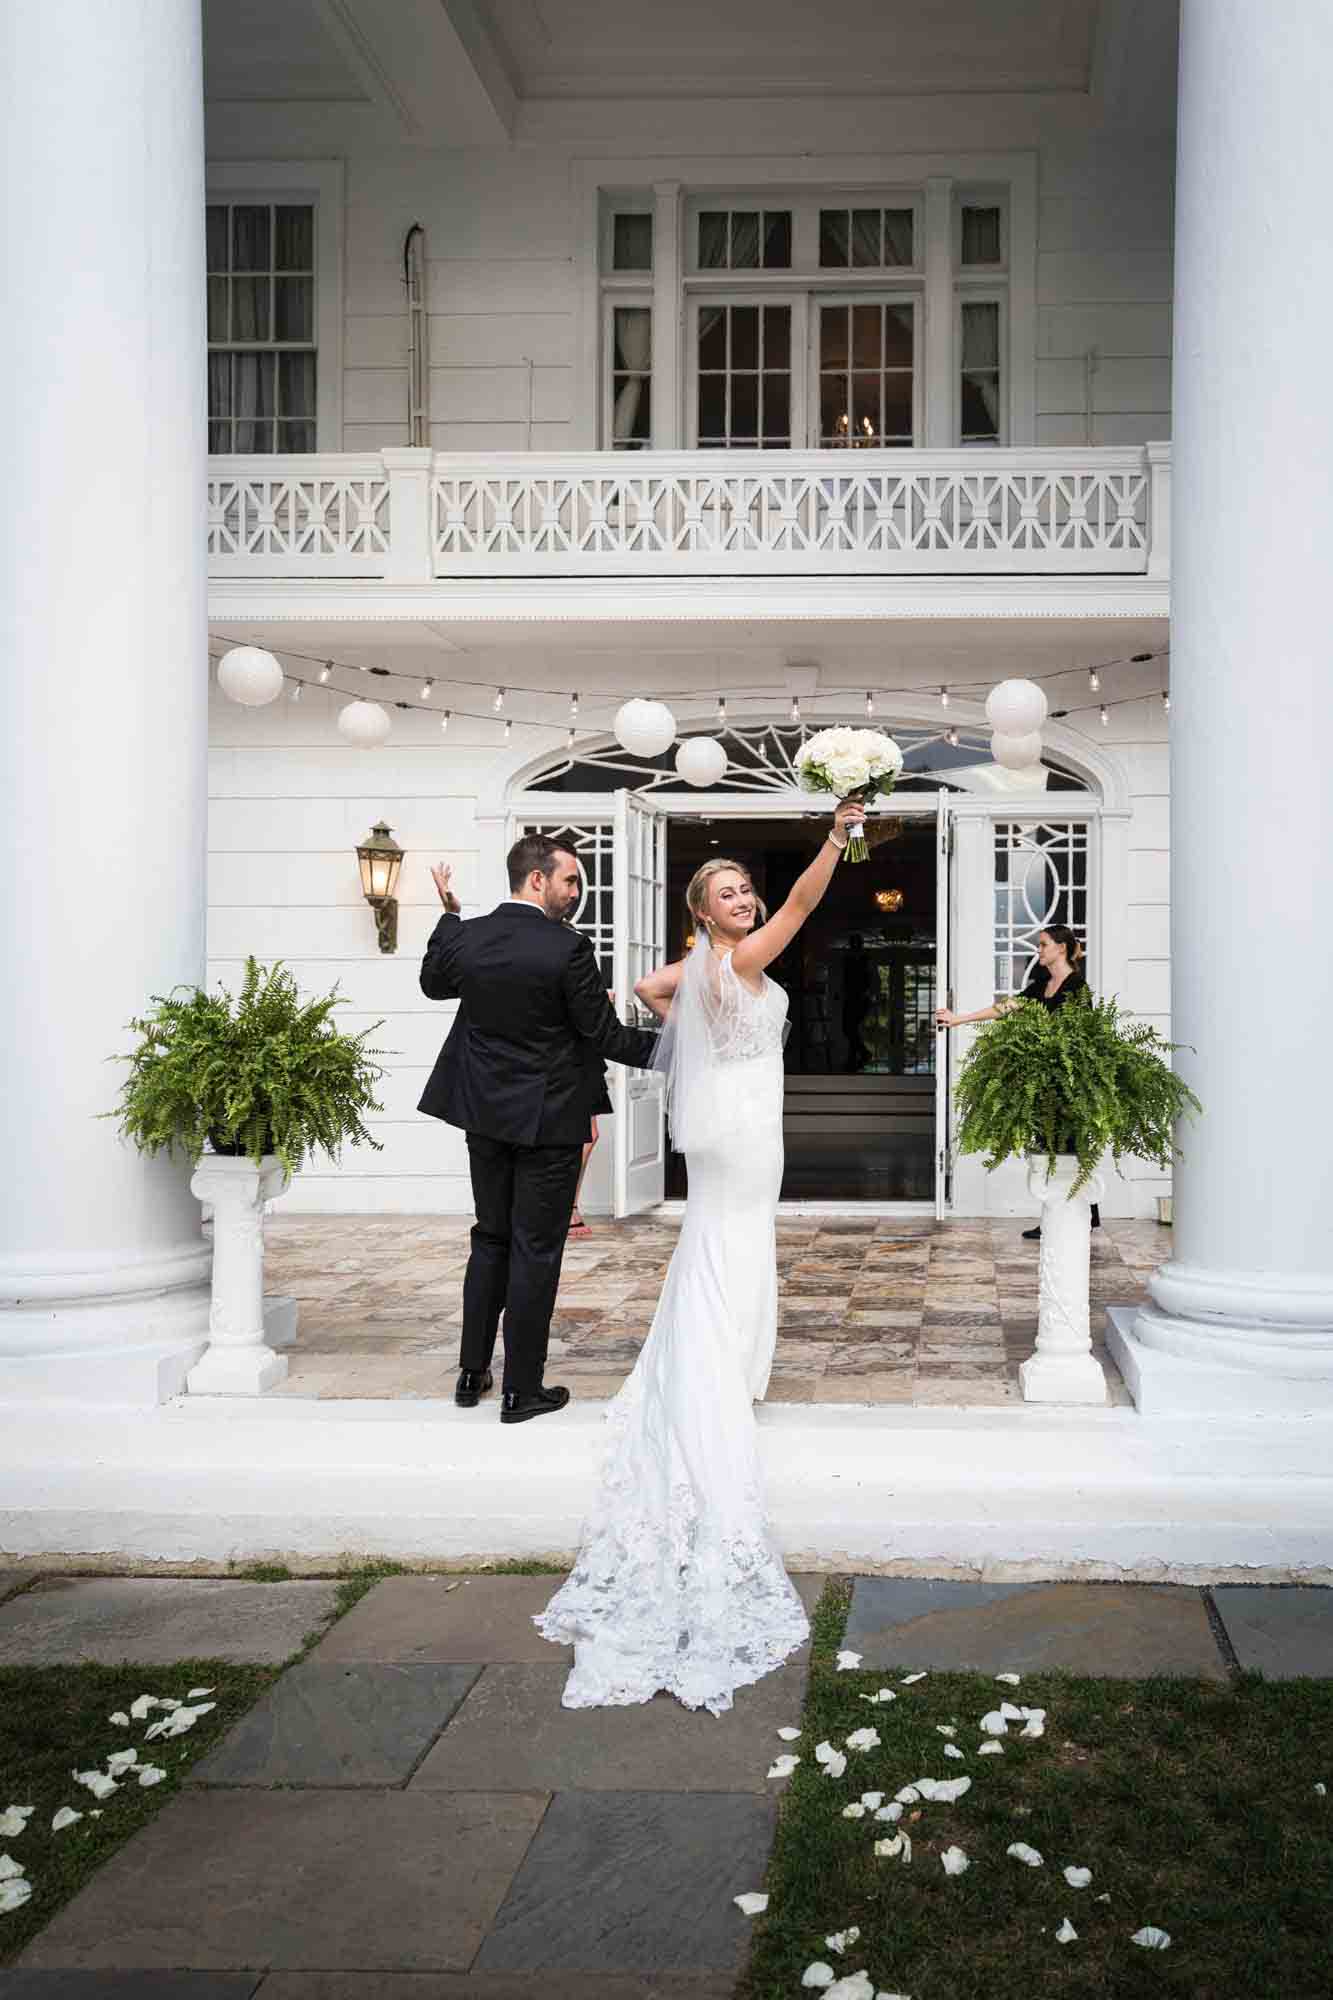 Bride and groom fist pumping and looking backwards after ceremony at a Briarcliff Manor wedding